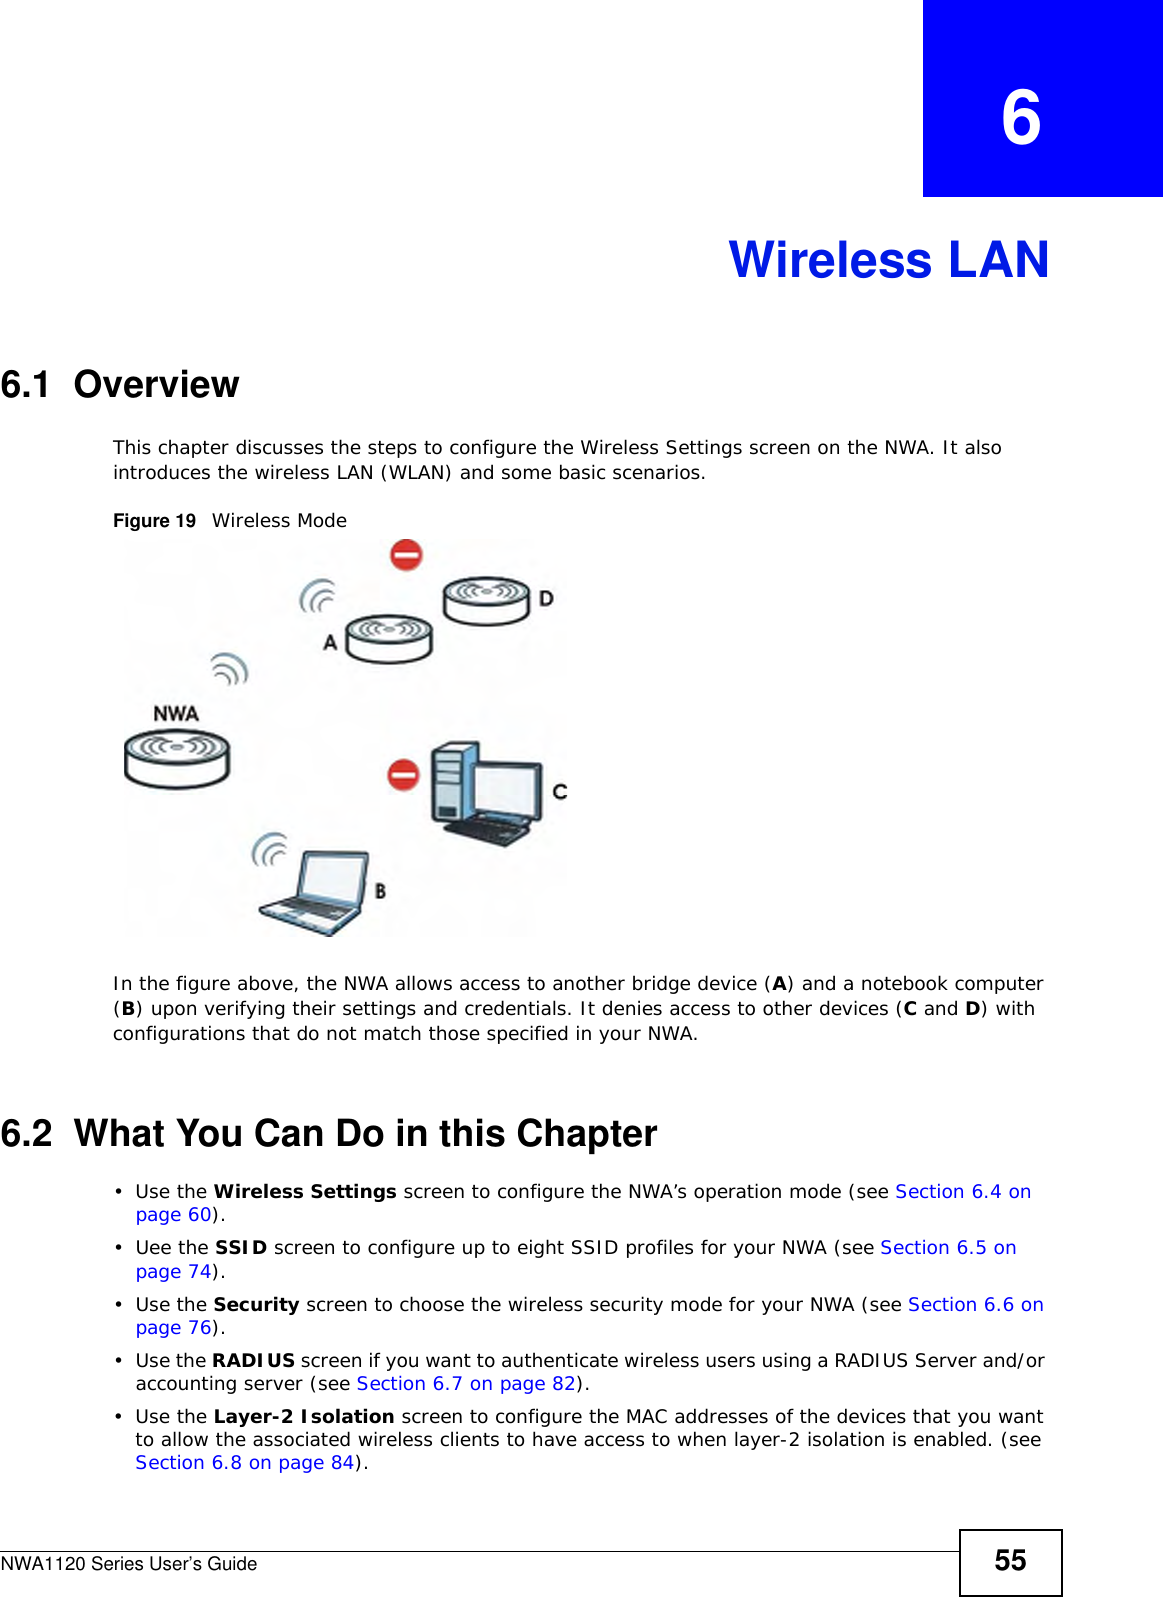 NWA1120 Series User’s Guide 55CHAPTER   6Wireless LAN6.1  OverviewThis chapter discusses the steps to configure the Wireless Settings screen on the NWA. It also introduces the wireless LAN (WLAN) and some basic scenarios.Figure 19   Wireless ModeIn the figure above, the NWA allows access to another bridge device (A) and a notebook computer (B) upon verifying their settings and credentials. It denies access to other devices (C and D) with configurations that do not match those specified in your NWA.6.2  What You Can Do in this Chapter•Use the Wireless Settings screen to configure the NWA’s operation mode (see Section 6.4 on page 60).•Uee the SSID screen to configure up to eight SSID profiles for your NWA (see Section 6.5 on page 74).•Use the Security screen to choose the wireless security mode for your NWA (see Section 6.6 on page 76).•Use the RADIUS screen if you want to authenticate wireless users using a RADIUS Server and/or accounting server (see Section 6.7 on page 82).•Use the Layer-2 Isolation screen to configure the MAC addresses of the devices that you want to allow the associated wireless clients to have access to when layer-2 isolation is enabled. (see Section 6.8 on page 84).